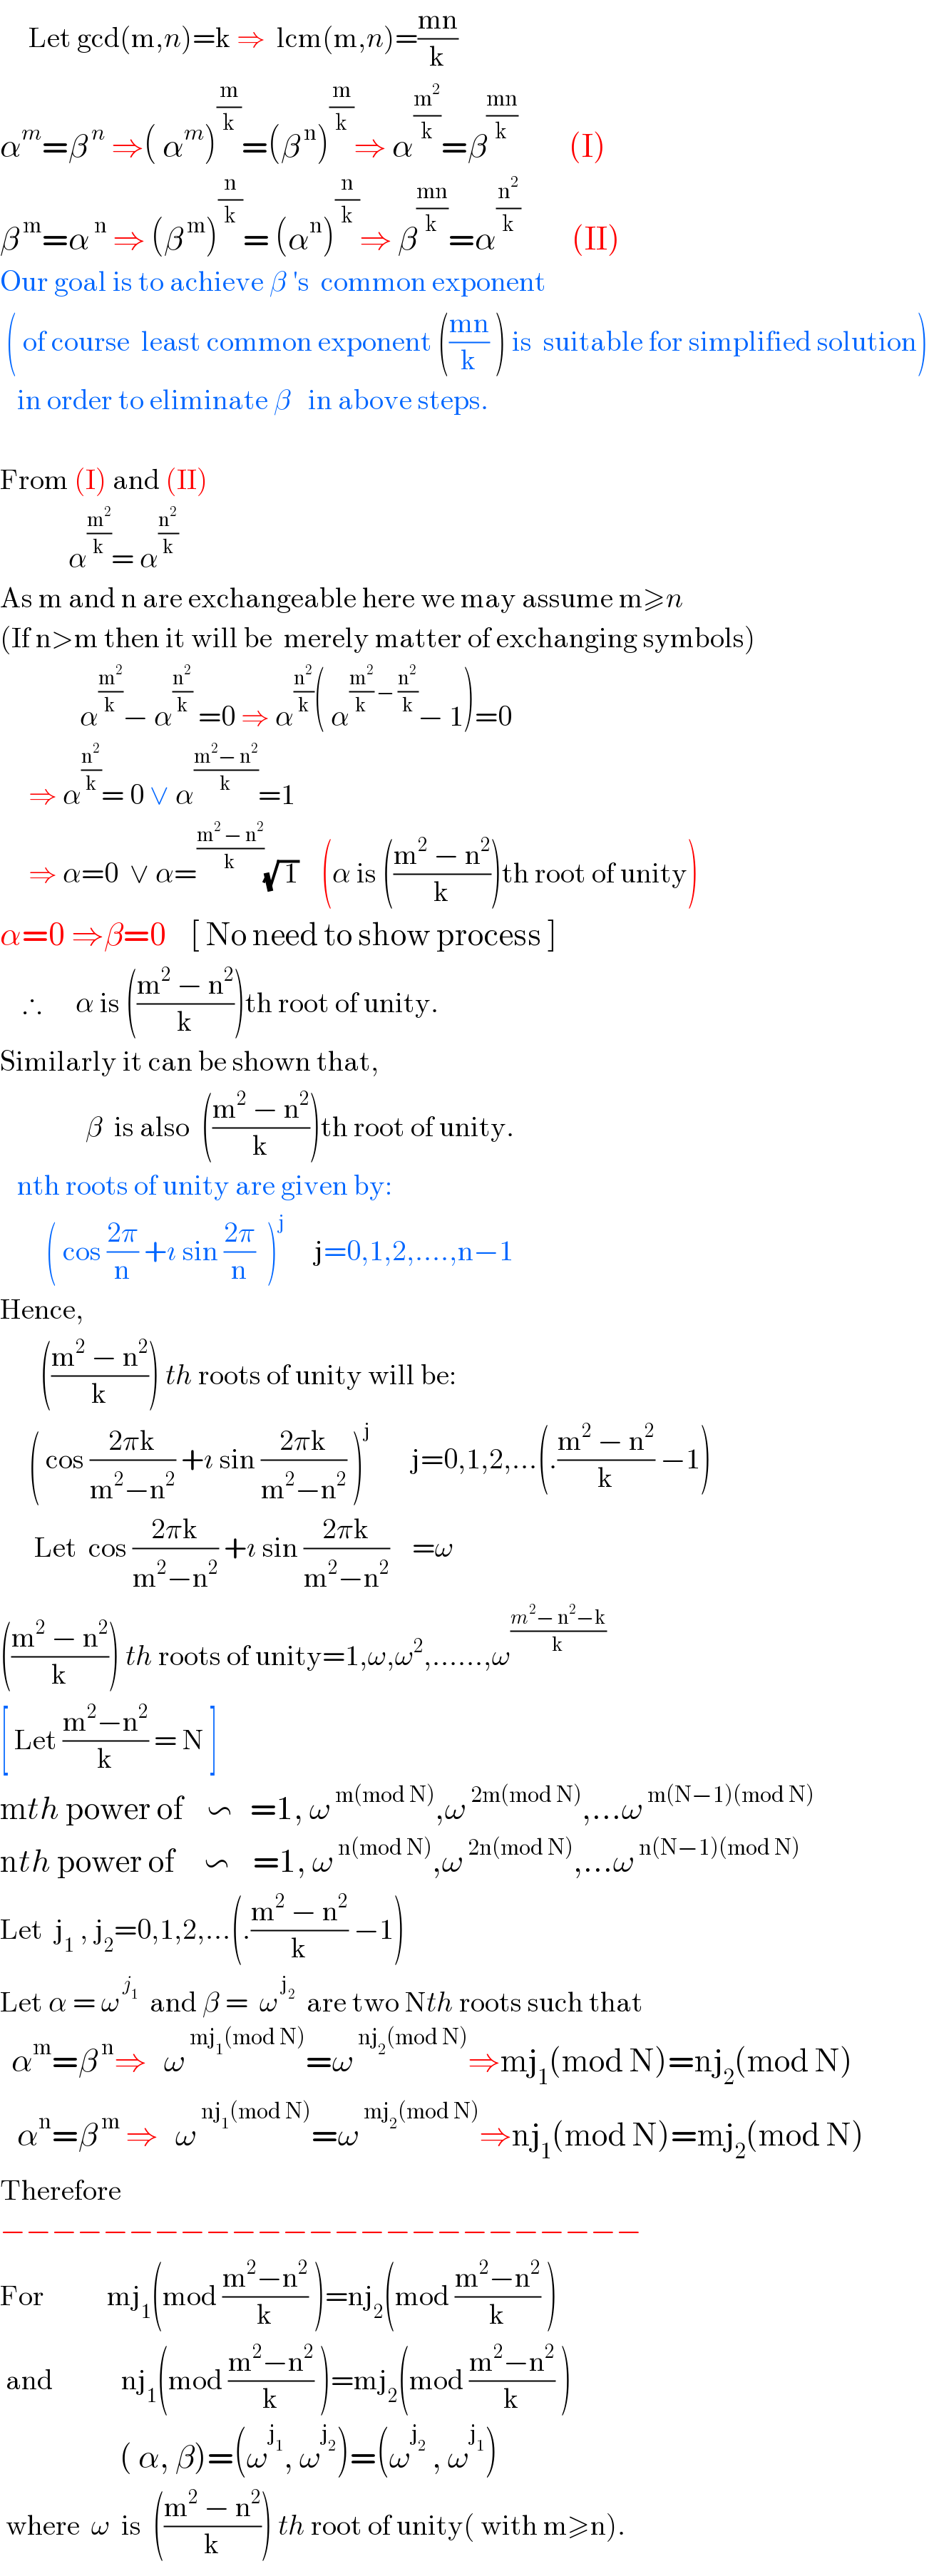      Let gcd(m,n)=k ⇒  lcm(m,n)=((mn)/k)  α^m =β^( n)  ⇒( α^m )^(m/k) =(β^( n) )^(m/k) ⇒ α^(m^2 /k) =β^((mn)/k)          (I)  β^( m) =α^( n)  ⇒ (β^( m) )^(n/k) = (α^n )^(n/k) ⇒ β^((mn)/k) =α^(n^2 /k)          (II)  Our goal is to achieve β ′s  common exponent    ( of course  least common exponent (((mn)/k) ) is  suitable for simplified solution)      in order to eliminate β   in above steps.    From (I) and (II)              α^(m^2 /k) = α^(n^2 /k)    As m and n are exchangeable here we may assume m≥n   (If n>m then it will be  merely matter of exchanging symbols)                α^(m^2 /k) − α^(n^2 /k)  =0 ⇒ α^(n^2 /k) ( α^((m^2 /k) − (n^2 /k)) − 1)=0       ⇒ α^(n^2 /k) = 0 ∨ α^((m^2 − n^2 )/k) =1       ⇒ α=0  ∨ α=^((m^2  − n^2 )/k) (√( 1))    (α is (((m^2  − n^2 )/k))th root of unity)  α=0 ⇒β=0    [ No need to show process ]      ∴      α is (((m^2  − n^2 )/k))th root of unity.  Similarly it can be shown that,                 β  is also  (((m^2  − n^2 )/k))th root of unity.     nth roots of unity are given by:           ( cos ((2π)/n) +ı sin ((2π)/n)  )^j      j=0,1,2,....,n−1  Hence,         (((m^2  − n^2 )/k)) th roots of unity will be:       ( cos ((2πk)/(m^2 −n^2 )) +ı sin ((2πk)/(m^2 −n^2 )) )^j        j=0,1,2,...(.((m^2  − n^2 )/k) −1)        Let  cos ((2πk)/(m^2 −n^2 )) +ı sin ((2πk)/(m^2 −n^2 ))    =ω  (((m^2  − n^2 )/k)) th roots of unity=1,ω,ω^2 ,......,ω^((m^2 − n^2 −k)/k)   [ Let ((m^2 −n^2 )/k) = N ]  mth power of    ∽   =1, ω^( m(mod N)) ,ω^( 2m(mod N)) ,...ω^( m(N−1)(mod N))   nth power of     ∽    =1, ω^( n(mod N)) ,ω^( 2n(mod N)) ,...ω^( n(N−1)(mod N))   Let  j_1  , j_2 =0,1,2,...(.((m^2  − n^2 )/k) −1)  Let α = ω^( j_1 )   and β =  ω^( j_2 )   are two Nth roots such that    α^m =β^( n) ⇒   ω^( mj_1 (mod N)) =ω^( nj_2 (mod N)) ⇒mj_1 (mod N)=nj_2 (mod N)     α^n =β^( m)  ⇒   ω^( nj_1 (mod N)) =ω^( mj_2 (mod N)) ⇒nj_1 (mod N)=mj_2 (mod N)  Therefore   −−−−−−−−−−−−−−−−−−−−−−−−−  For           mj_1 (mod ((m^2 −n^2 )/k) )=nj_2 (mod ((m^2 −n^2 )/k) )    and            nj_1 (mod ((m^2 −n^2 )/k) )=mj_2 (mod ((m^2 −n^2 )/k) )                       ( α, β)=(ω^j_1  , ω^j_2  )=(ω^j_2   , ω^j_1  )   where  ω  is  (((m^2  − n^2 )/k)) th root of unity( with m≥n).  